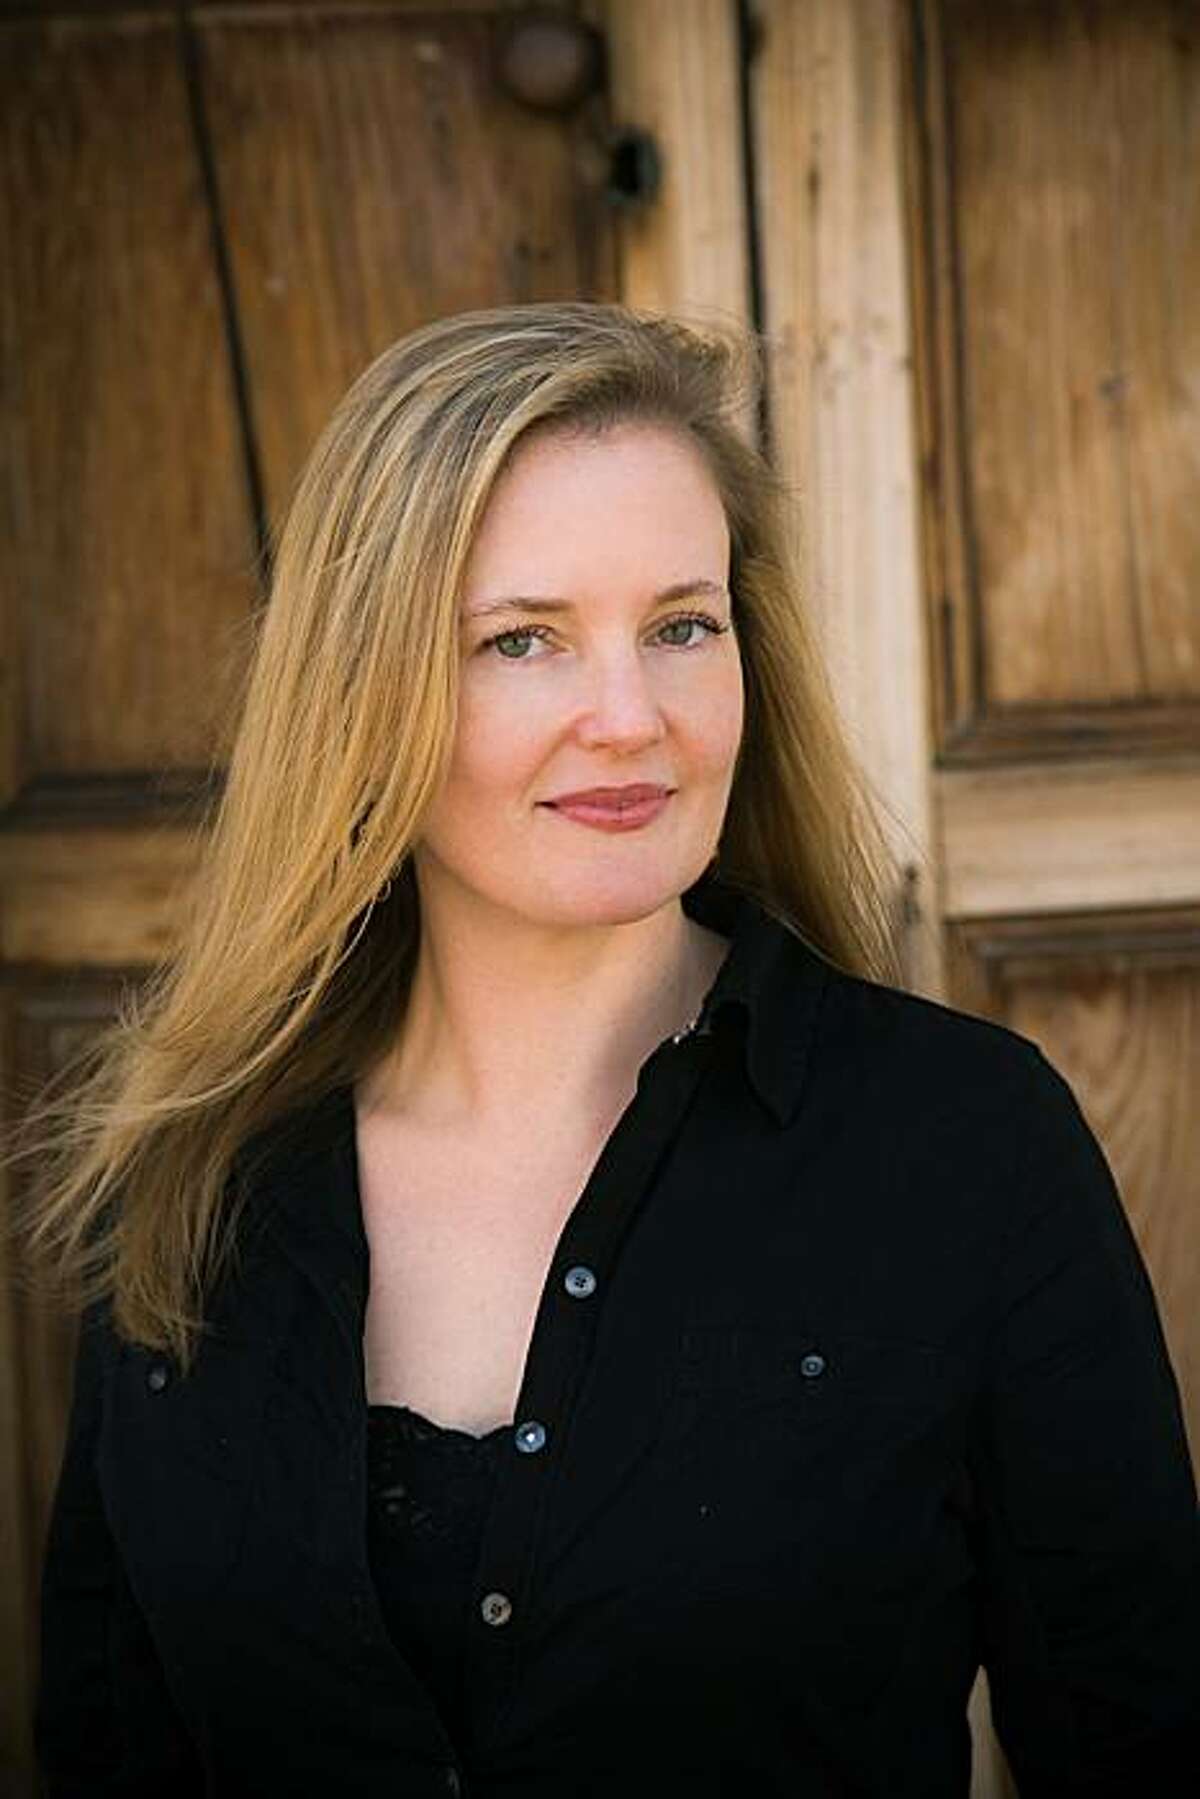 Siobhan Fallon, author of "You know when the men are gone"